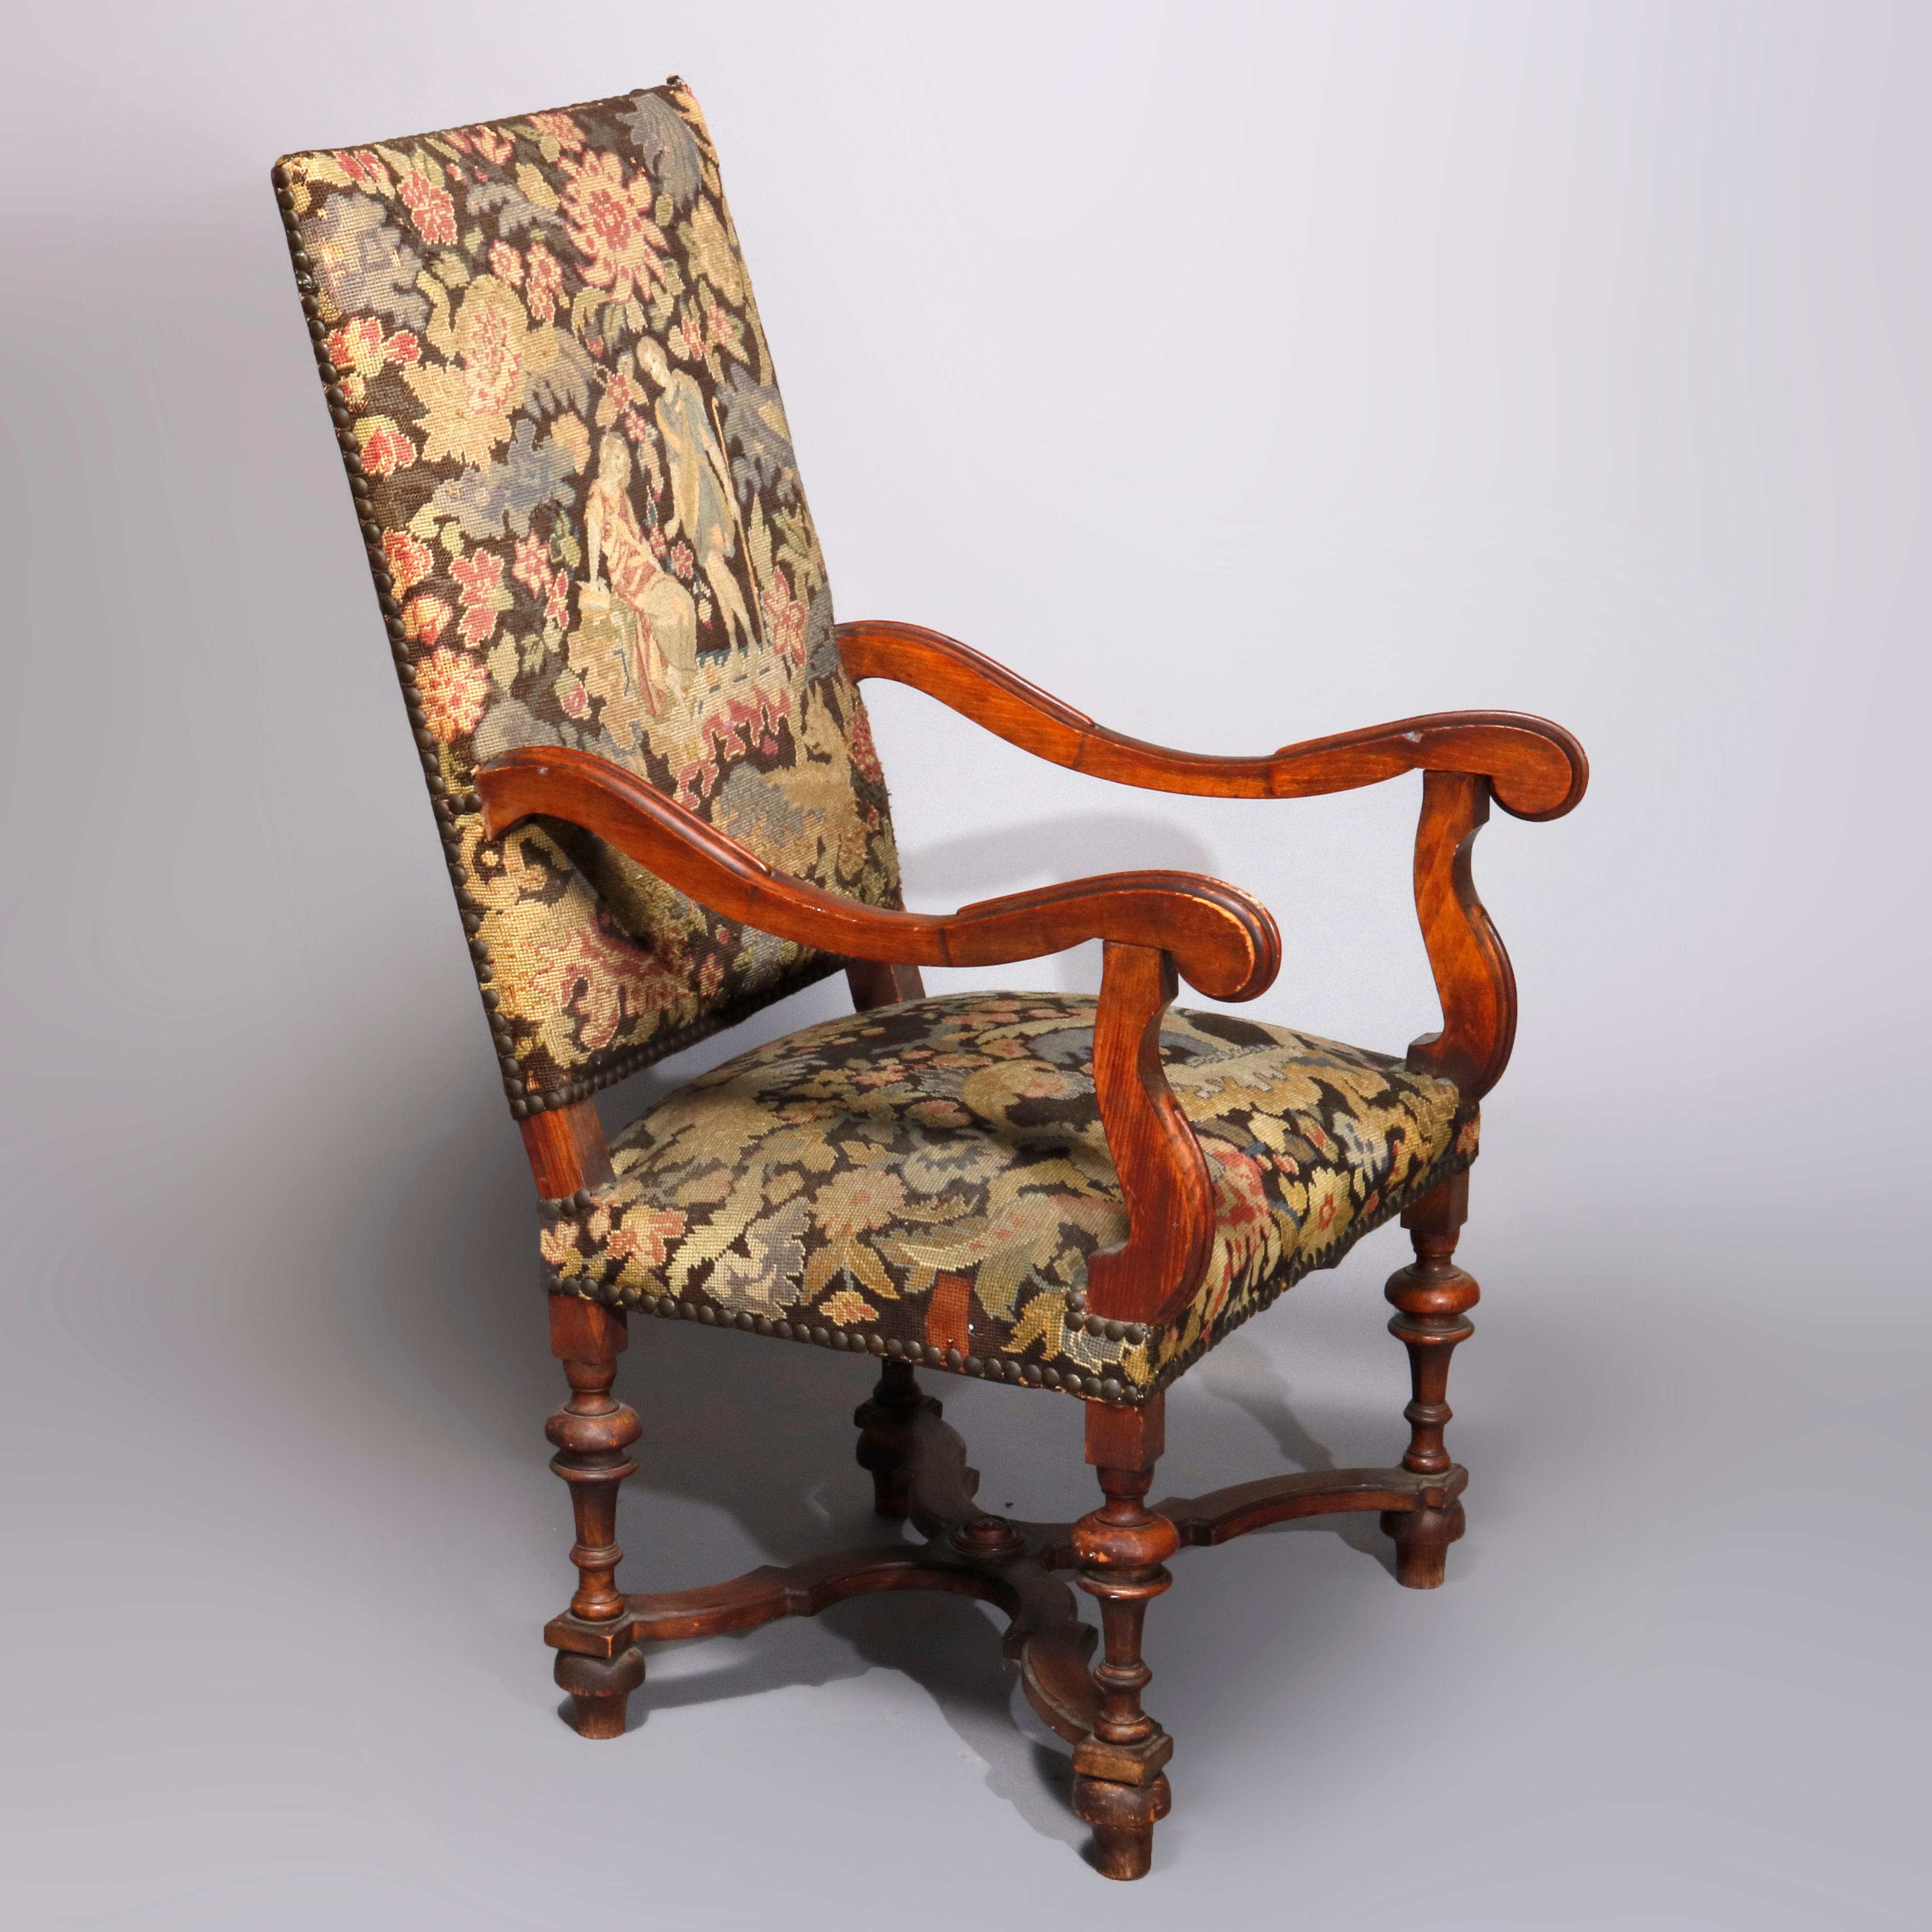 An antique English Elizabethan style tall throne armchair offers carved walnut frame with tapestry upholstery having countryside courting scene, raised on turned legs with X-form stretcher, circa 1890.

Measures- 47